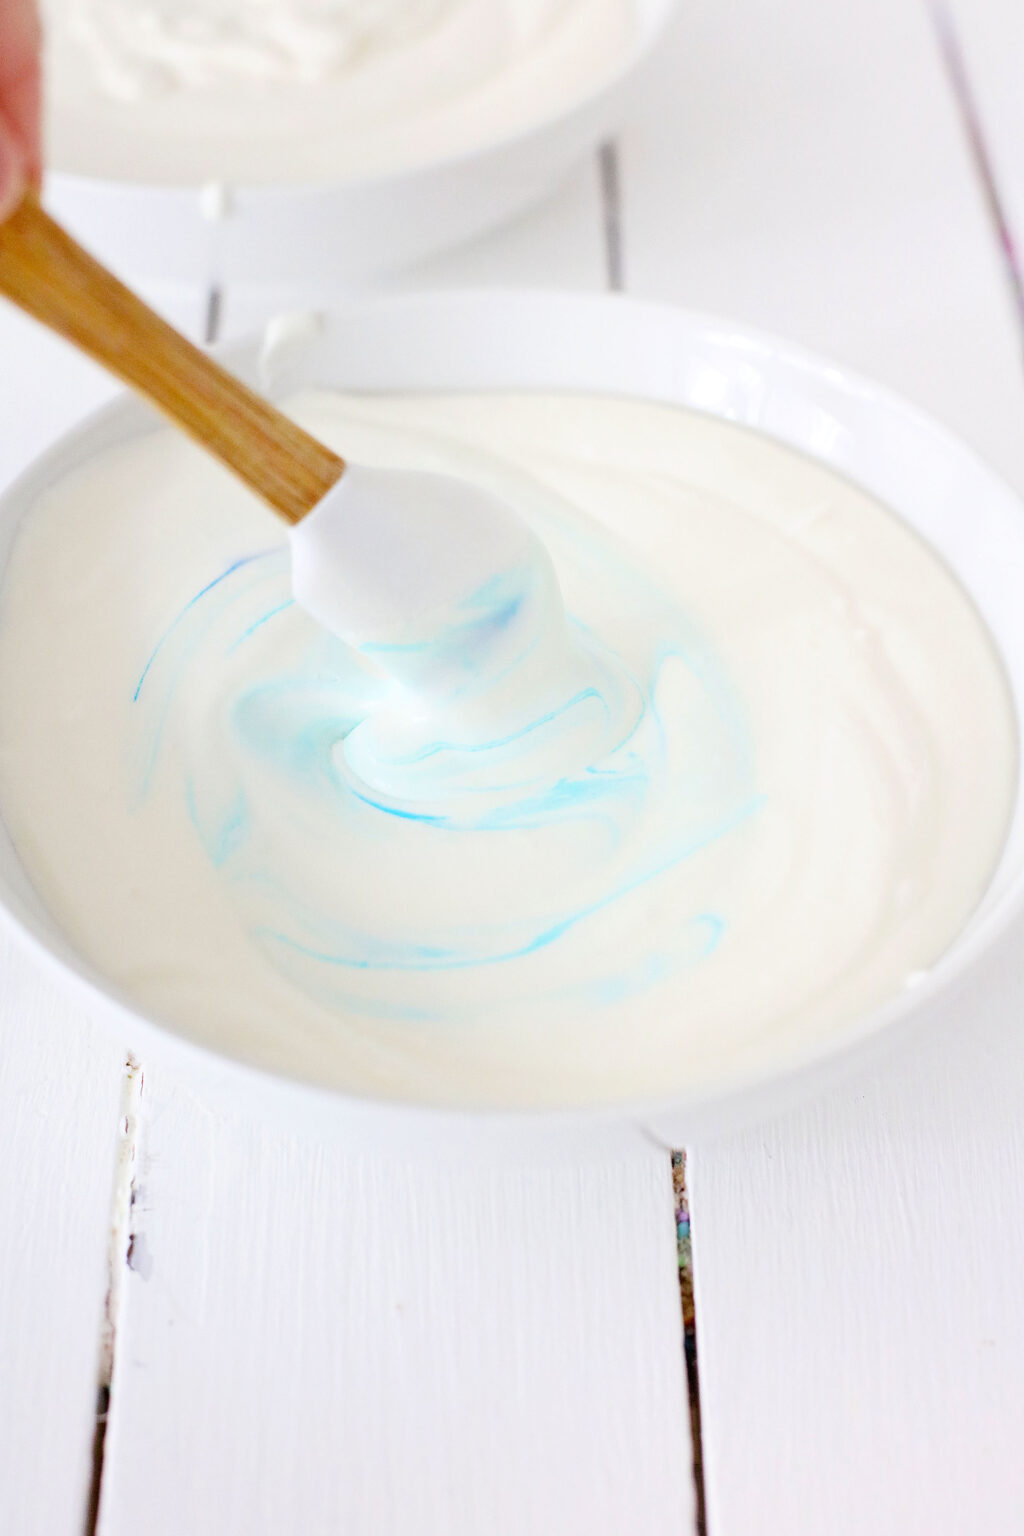 blue food coloring being mixed into ice cream mixture in large bowl